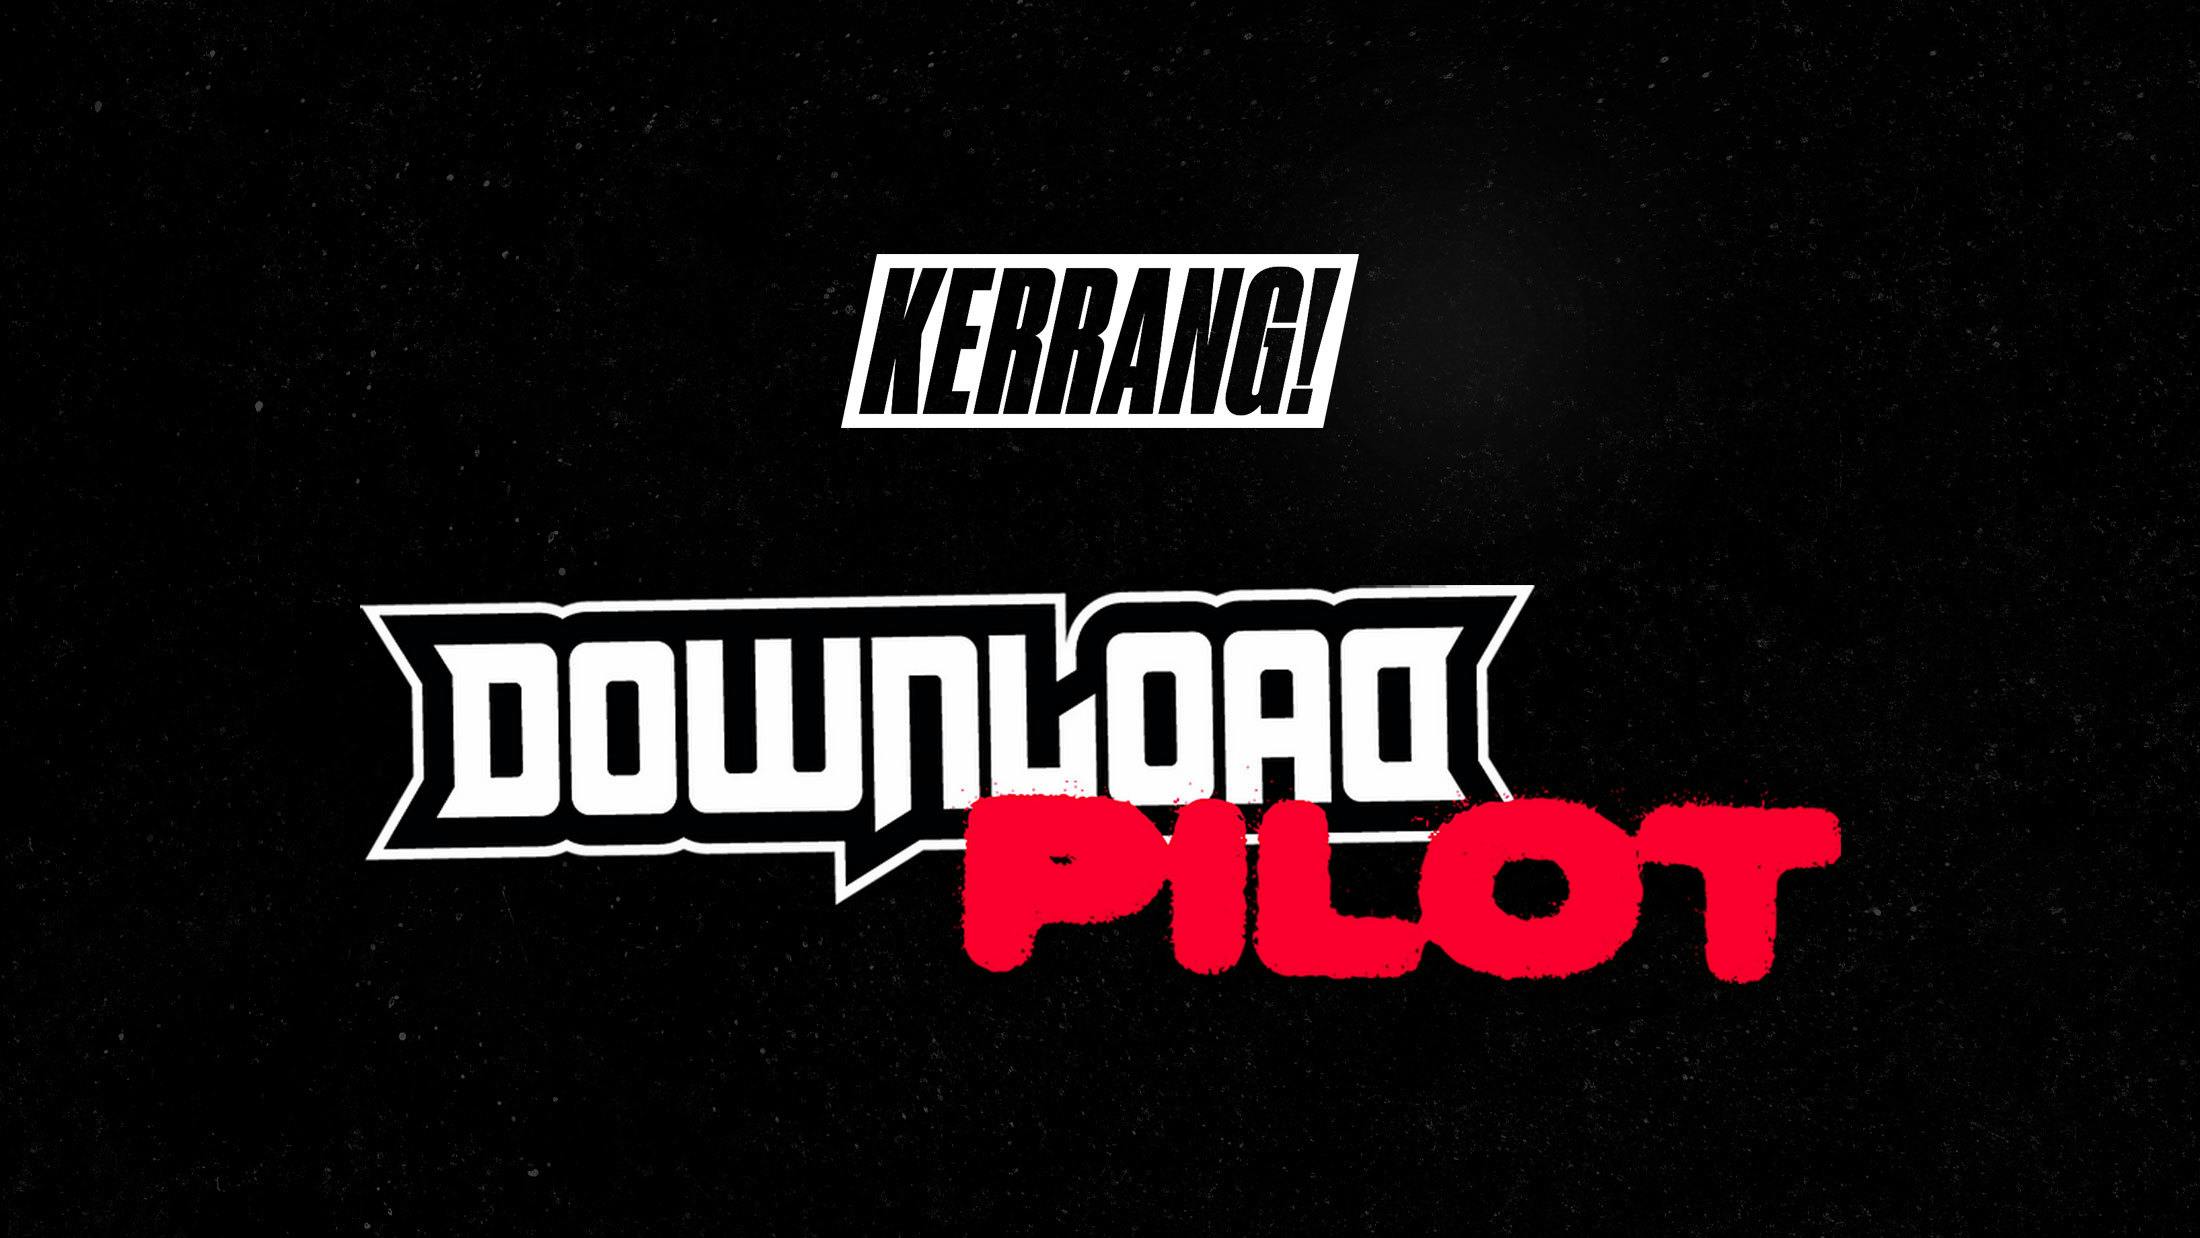 This weekend: Kerrang! brings you unparalleled coverage of Download Pilot